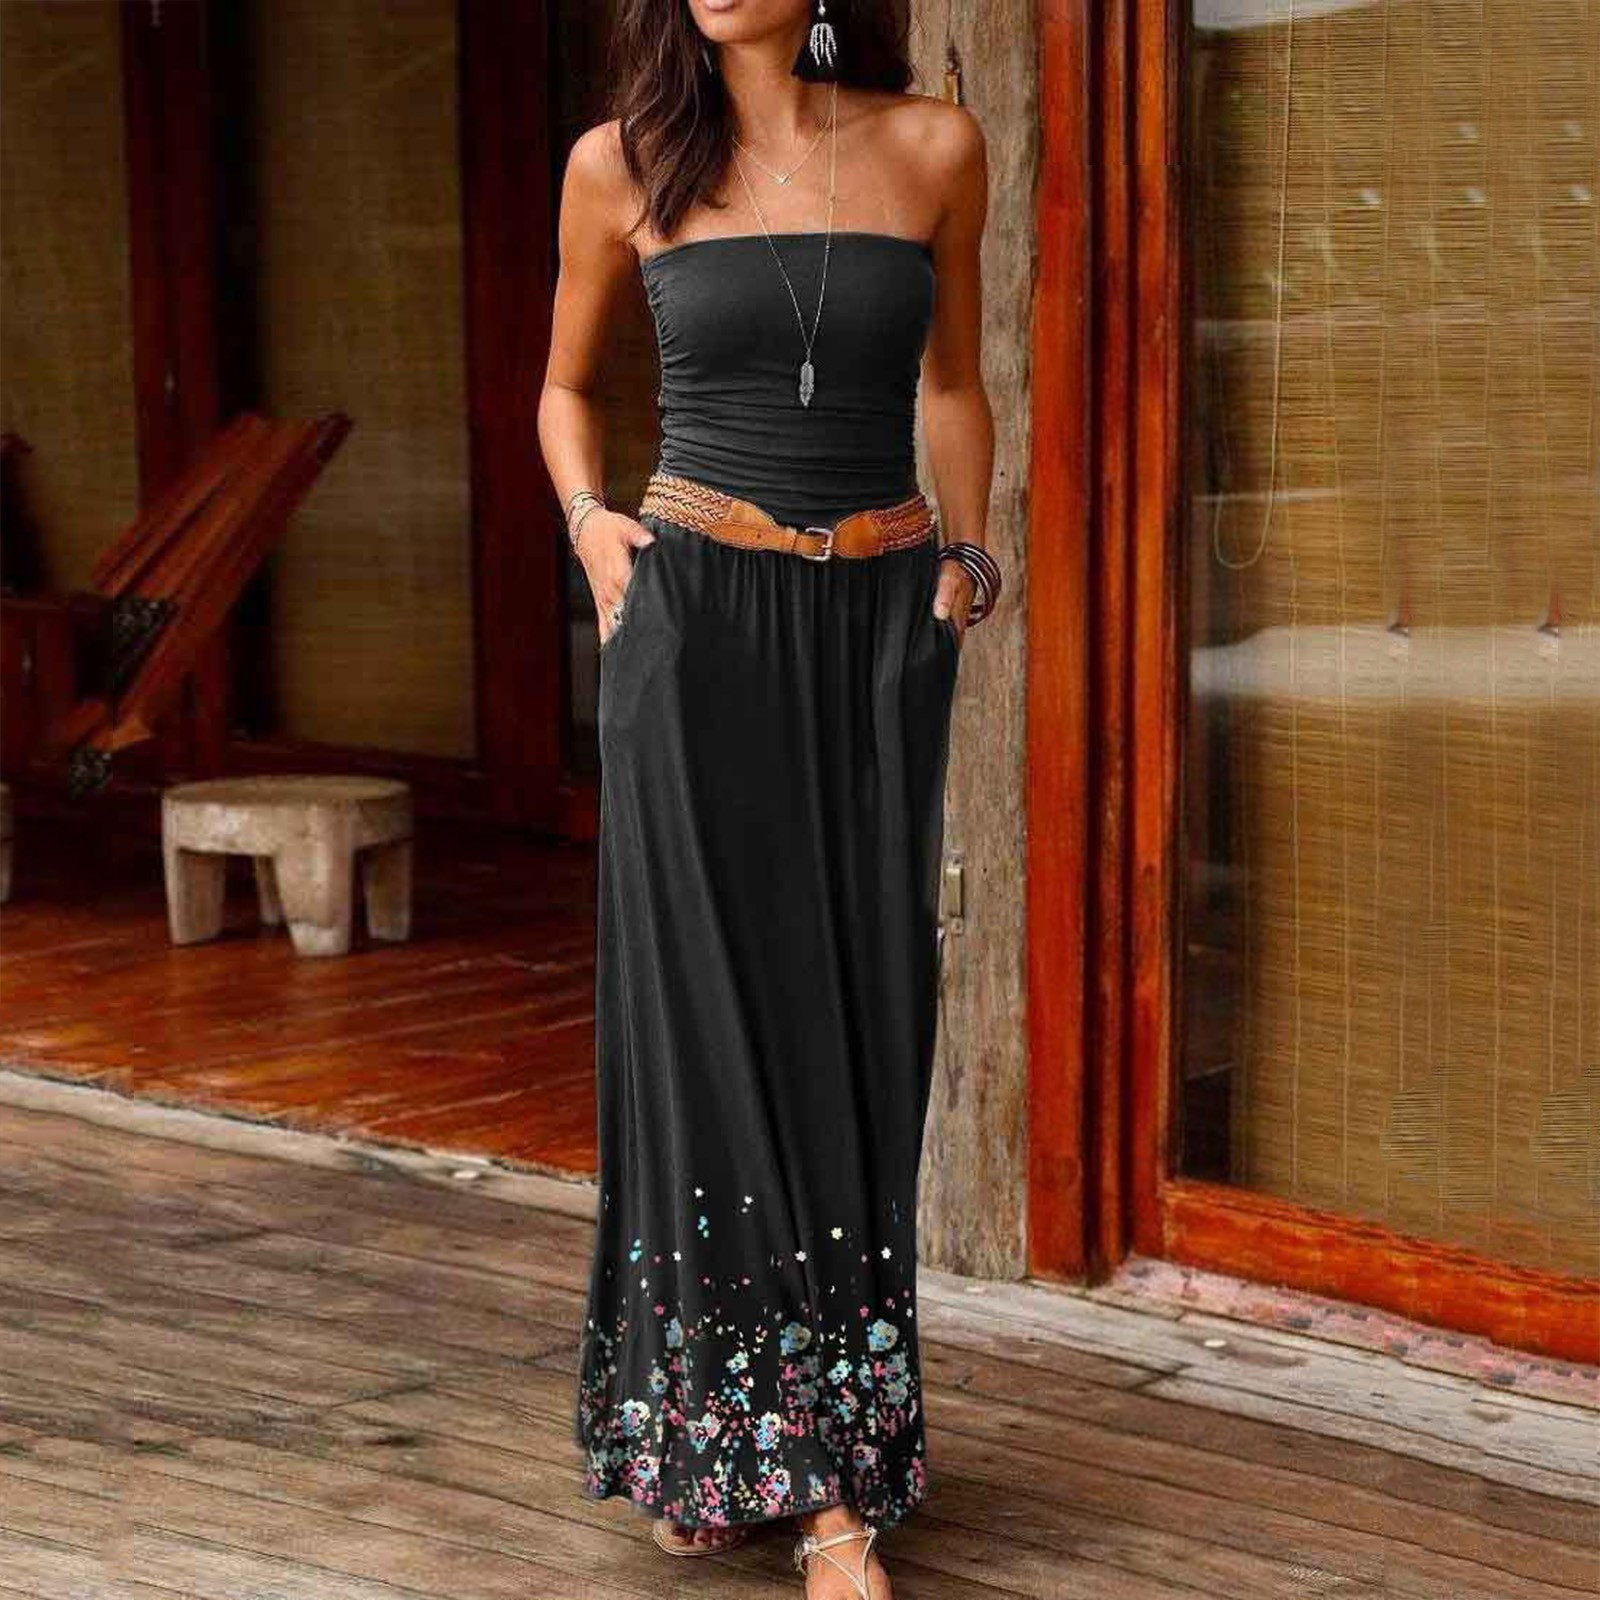 Women's Summer Sexy Loose Casual Sleeveless Printing Strapless